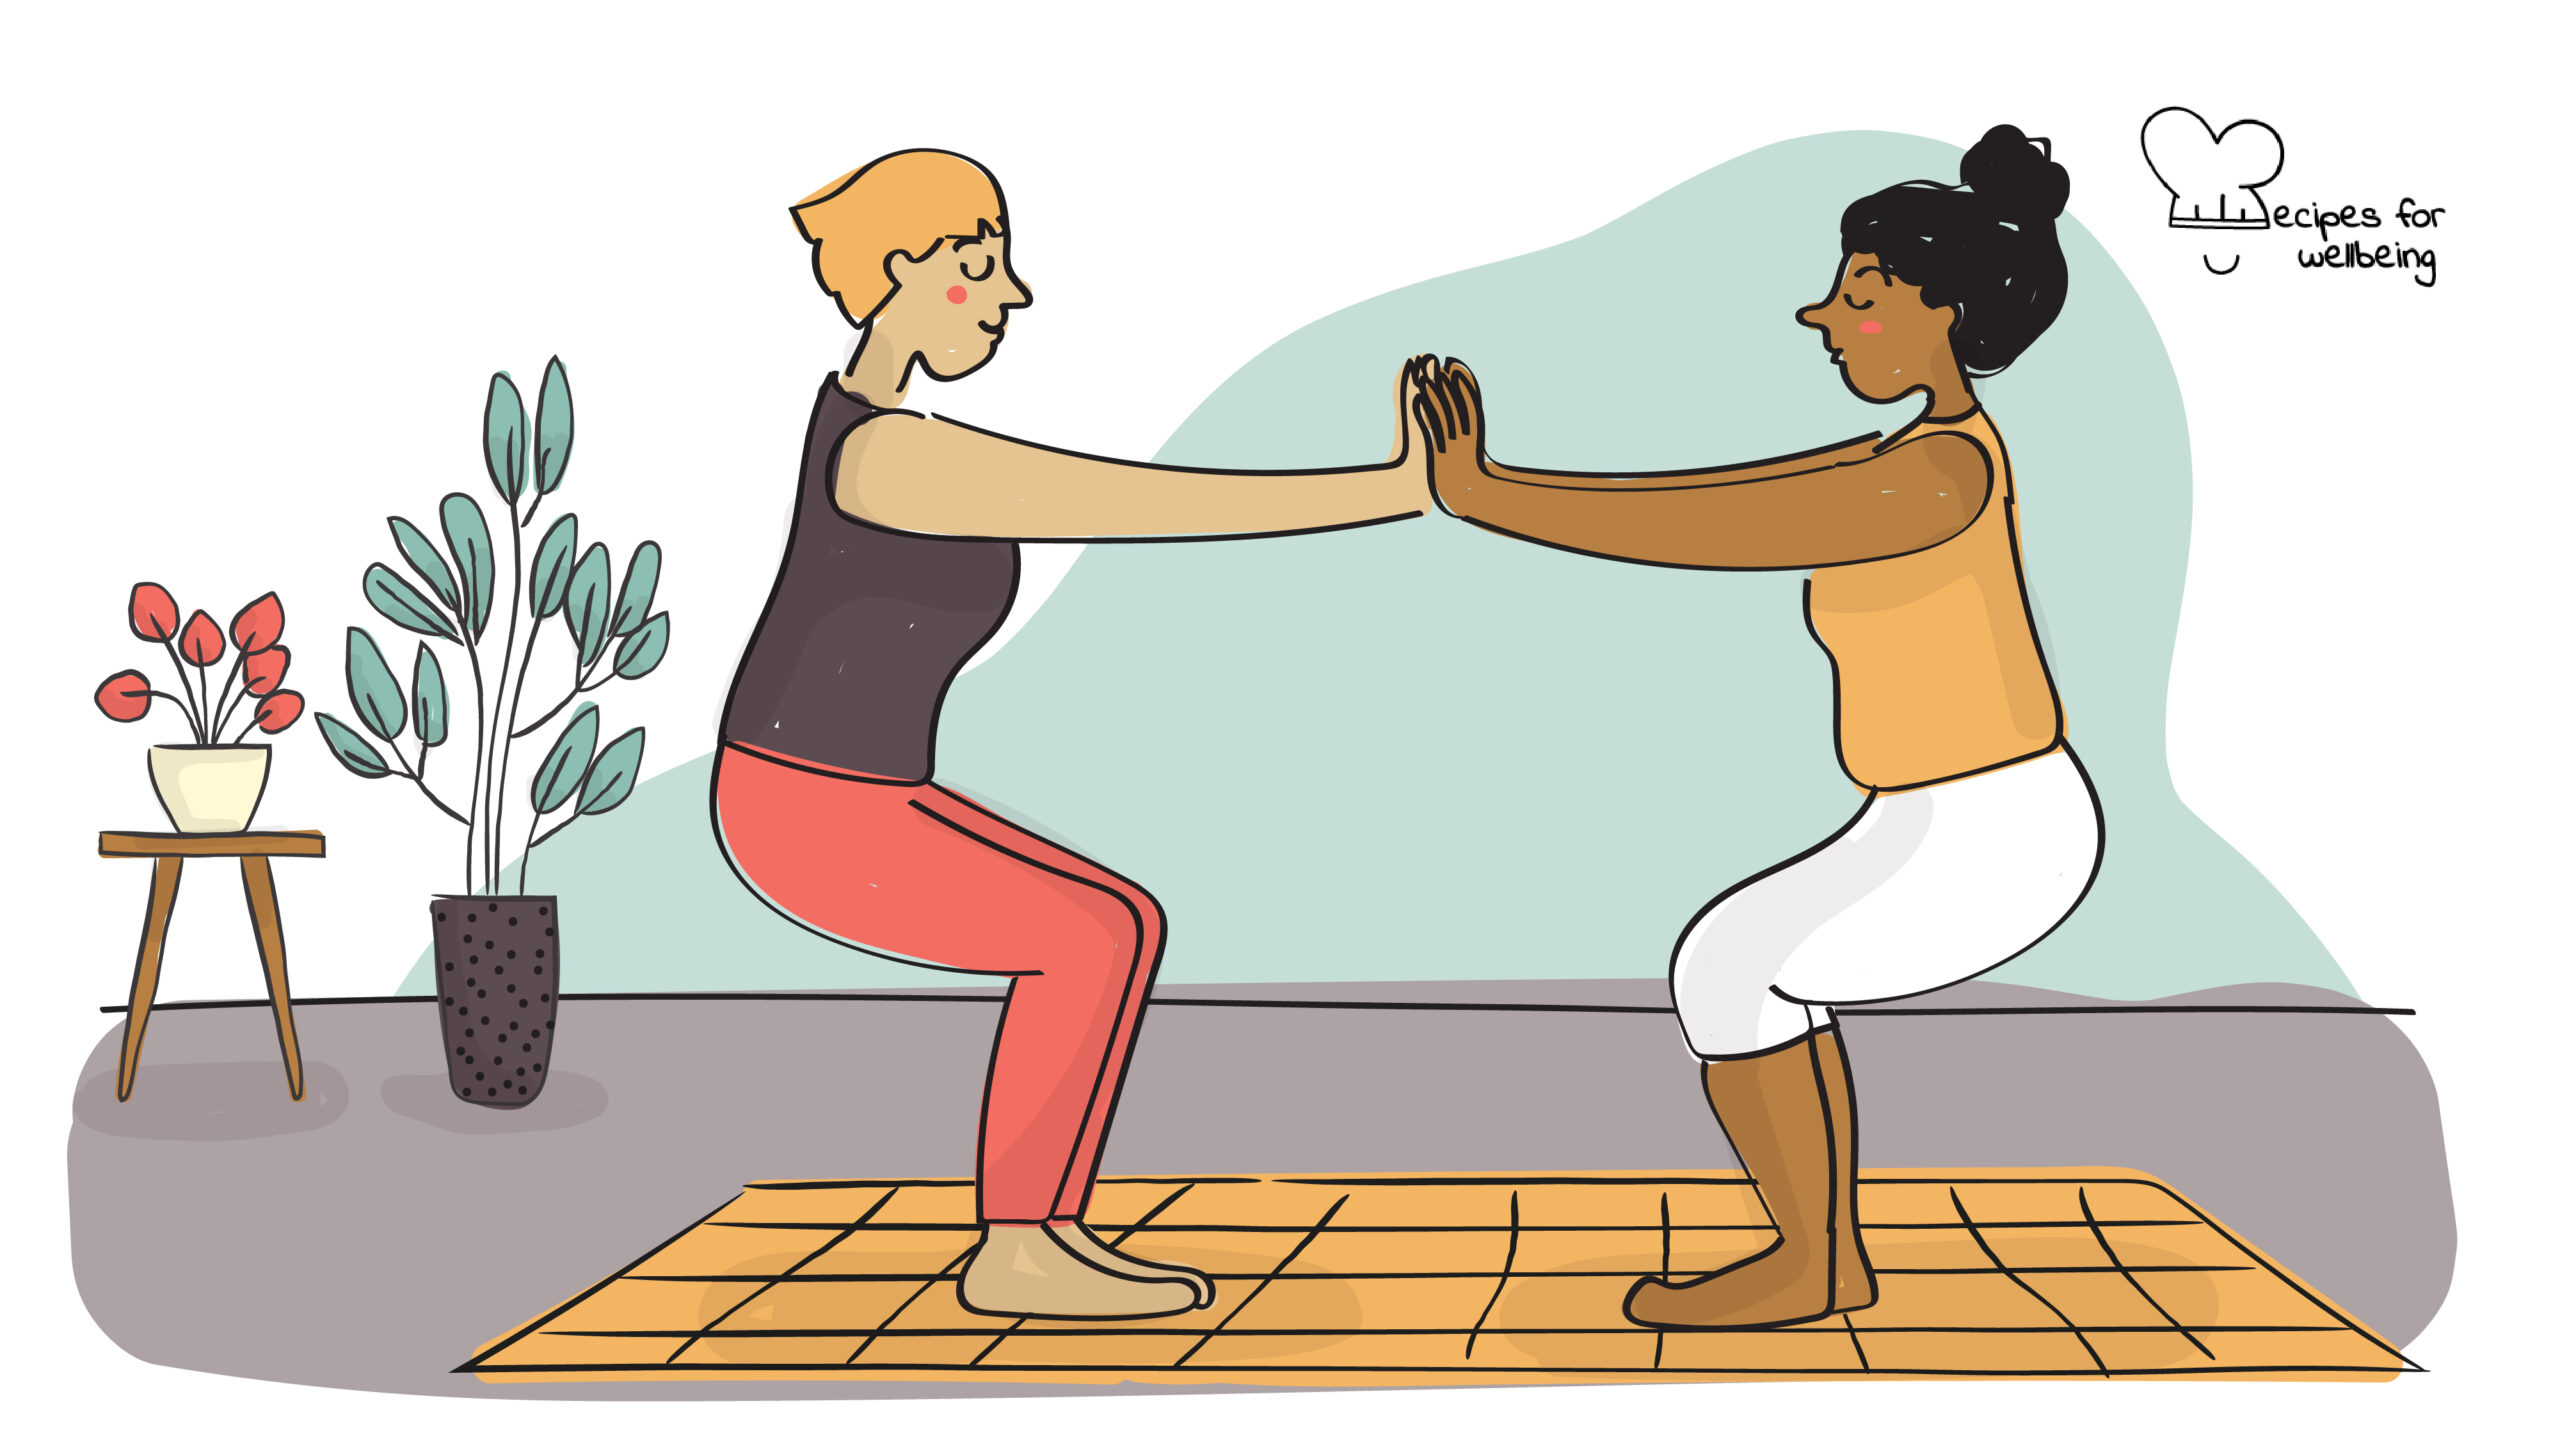 Illustration of two people standing in front of each other and pressing their hands together to maintain balance. © Recipes for Wellbeing